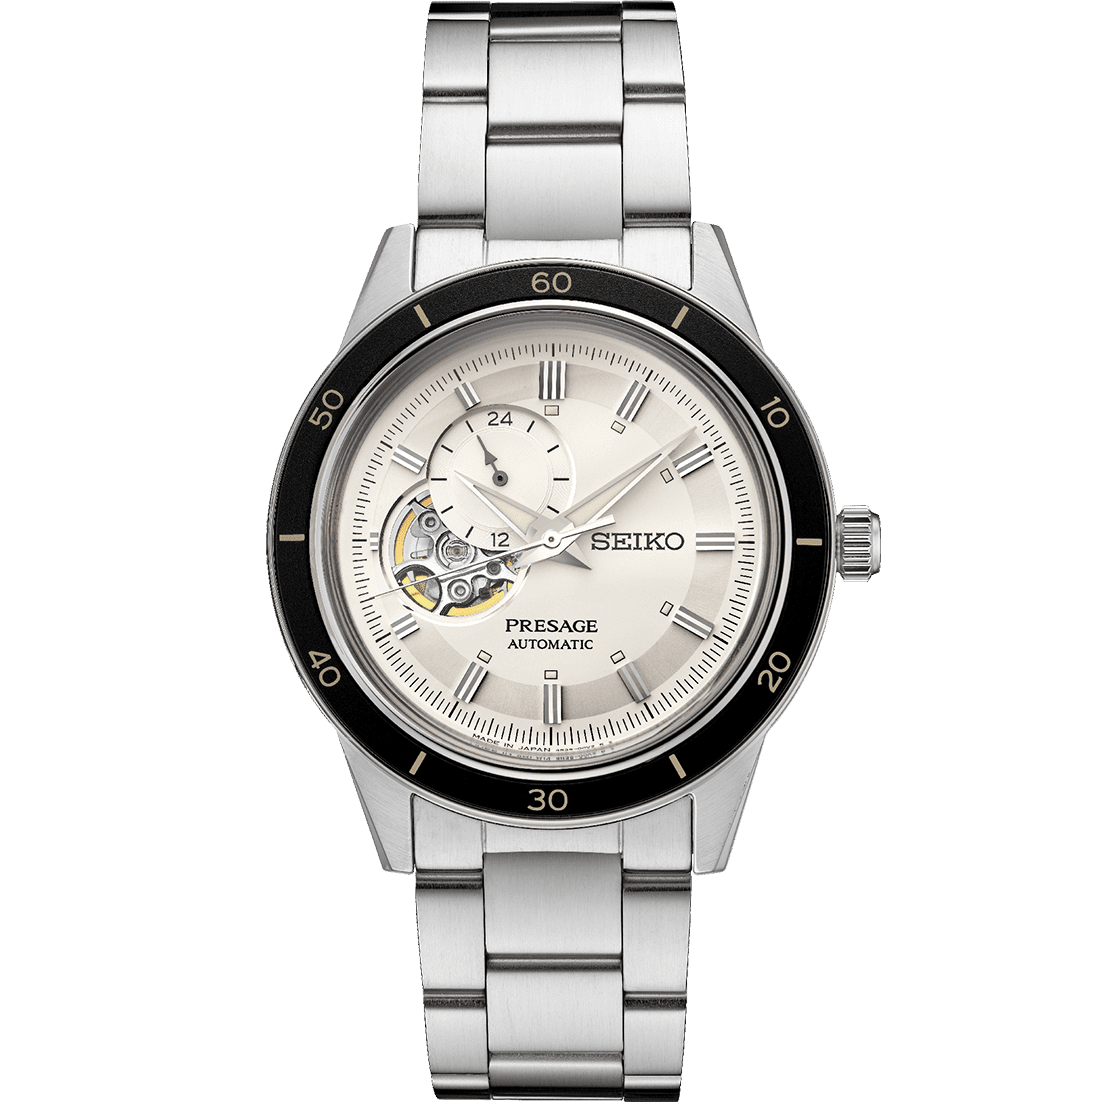 Undertrykke Nord Bevægelse My Watch ST Seiko Presage SSA423 Stainless Steel Magnetic Resistant  Automatic Men's Watch - Walmart.com